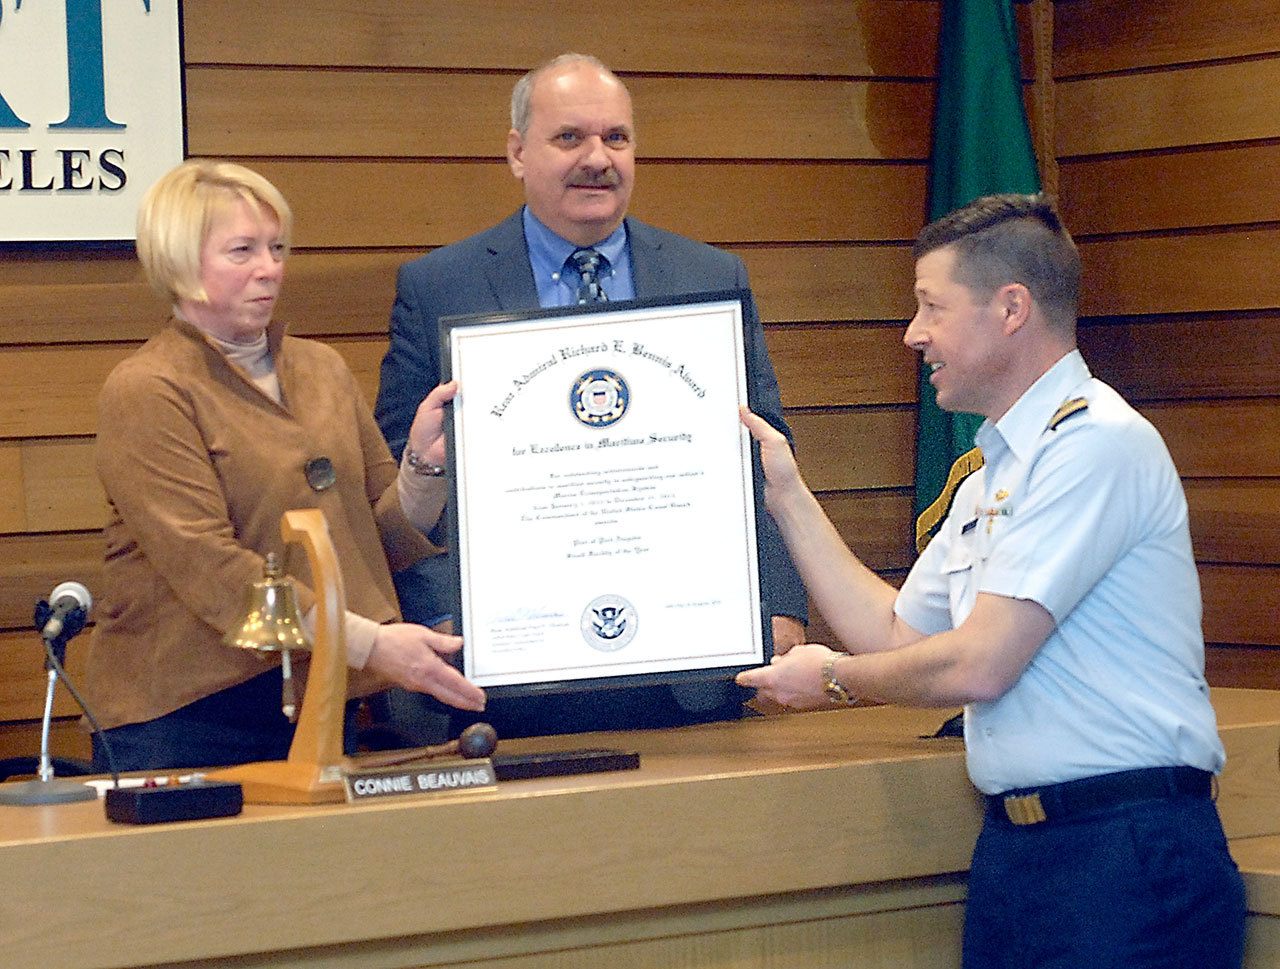 Port of Port Angeles Commissioners Connie Beauvais, left, and Steve Burke receive the Richard E. Bennis Award on Wednesday from U.S. Coast Guard Capt. Joe Raymond honoring the port for its effort to promote maritime transportation security. (Keith Thorpe/Peninsula Daily News)